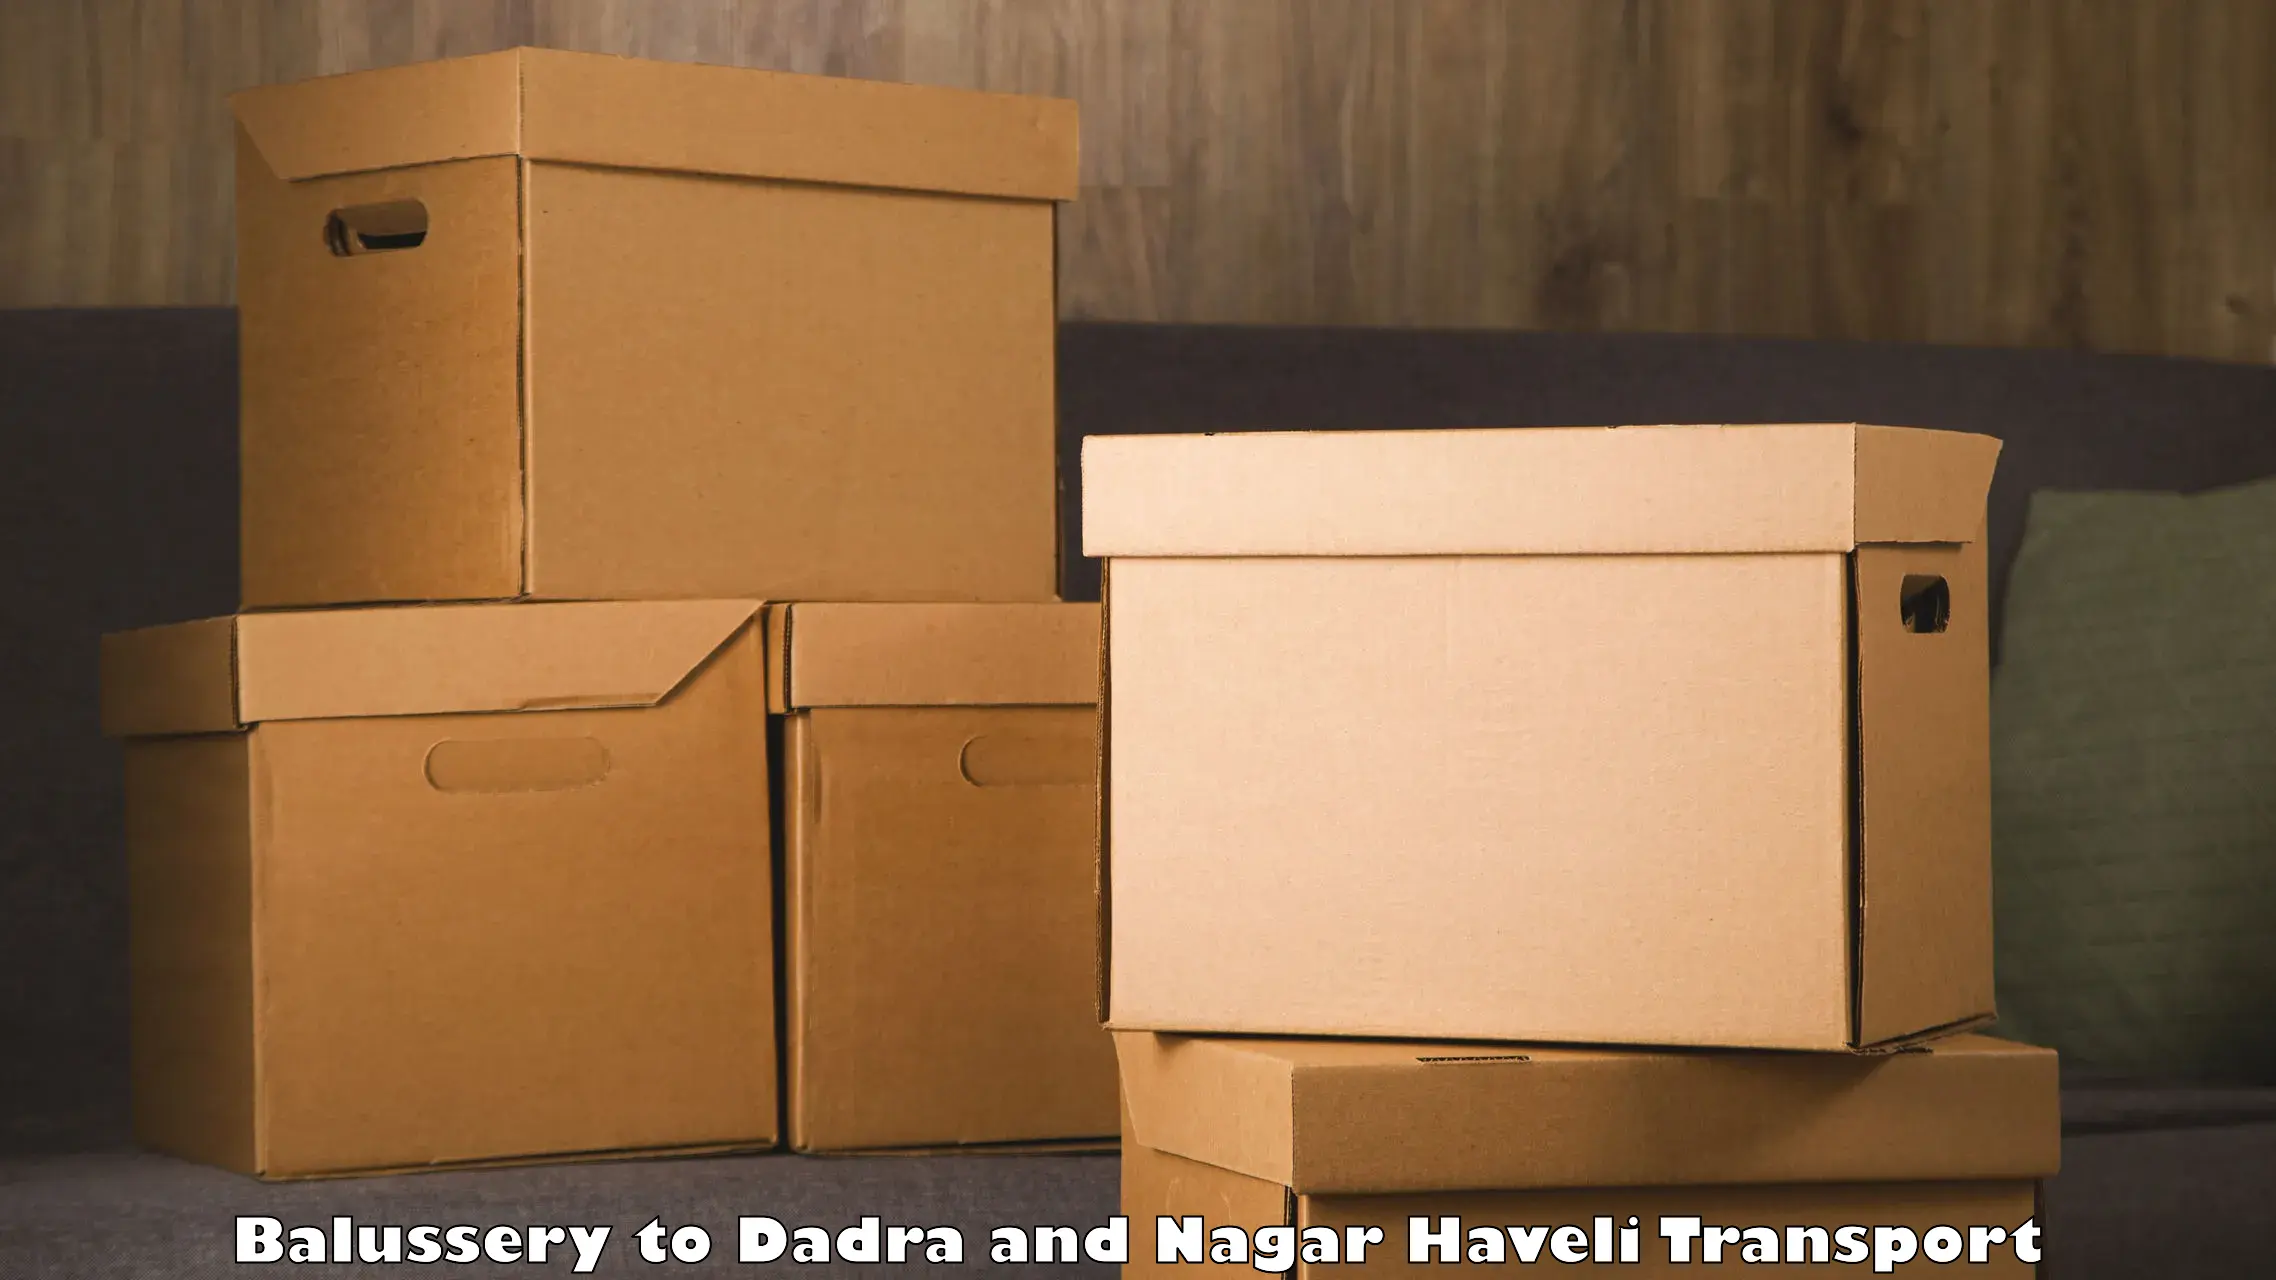 Lorry transport service Balussery to Dadra and Nagar Haveli